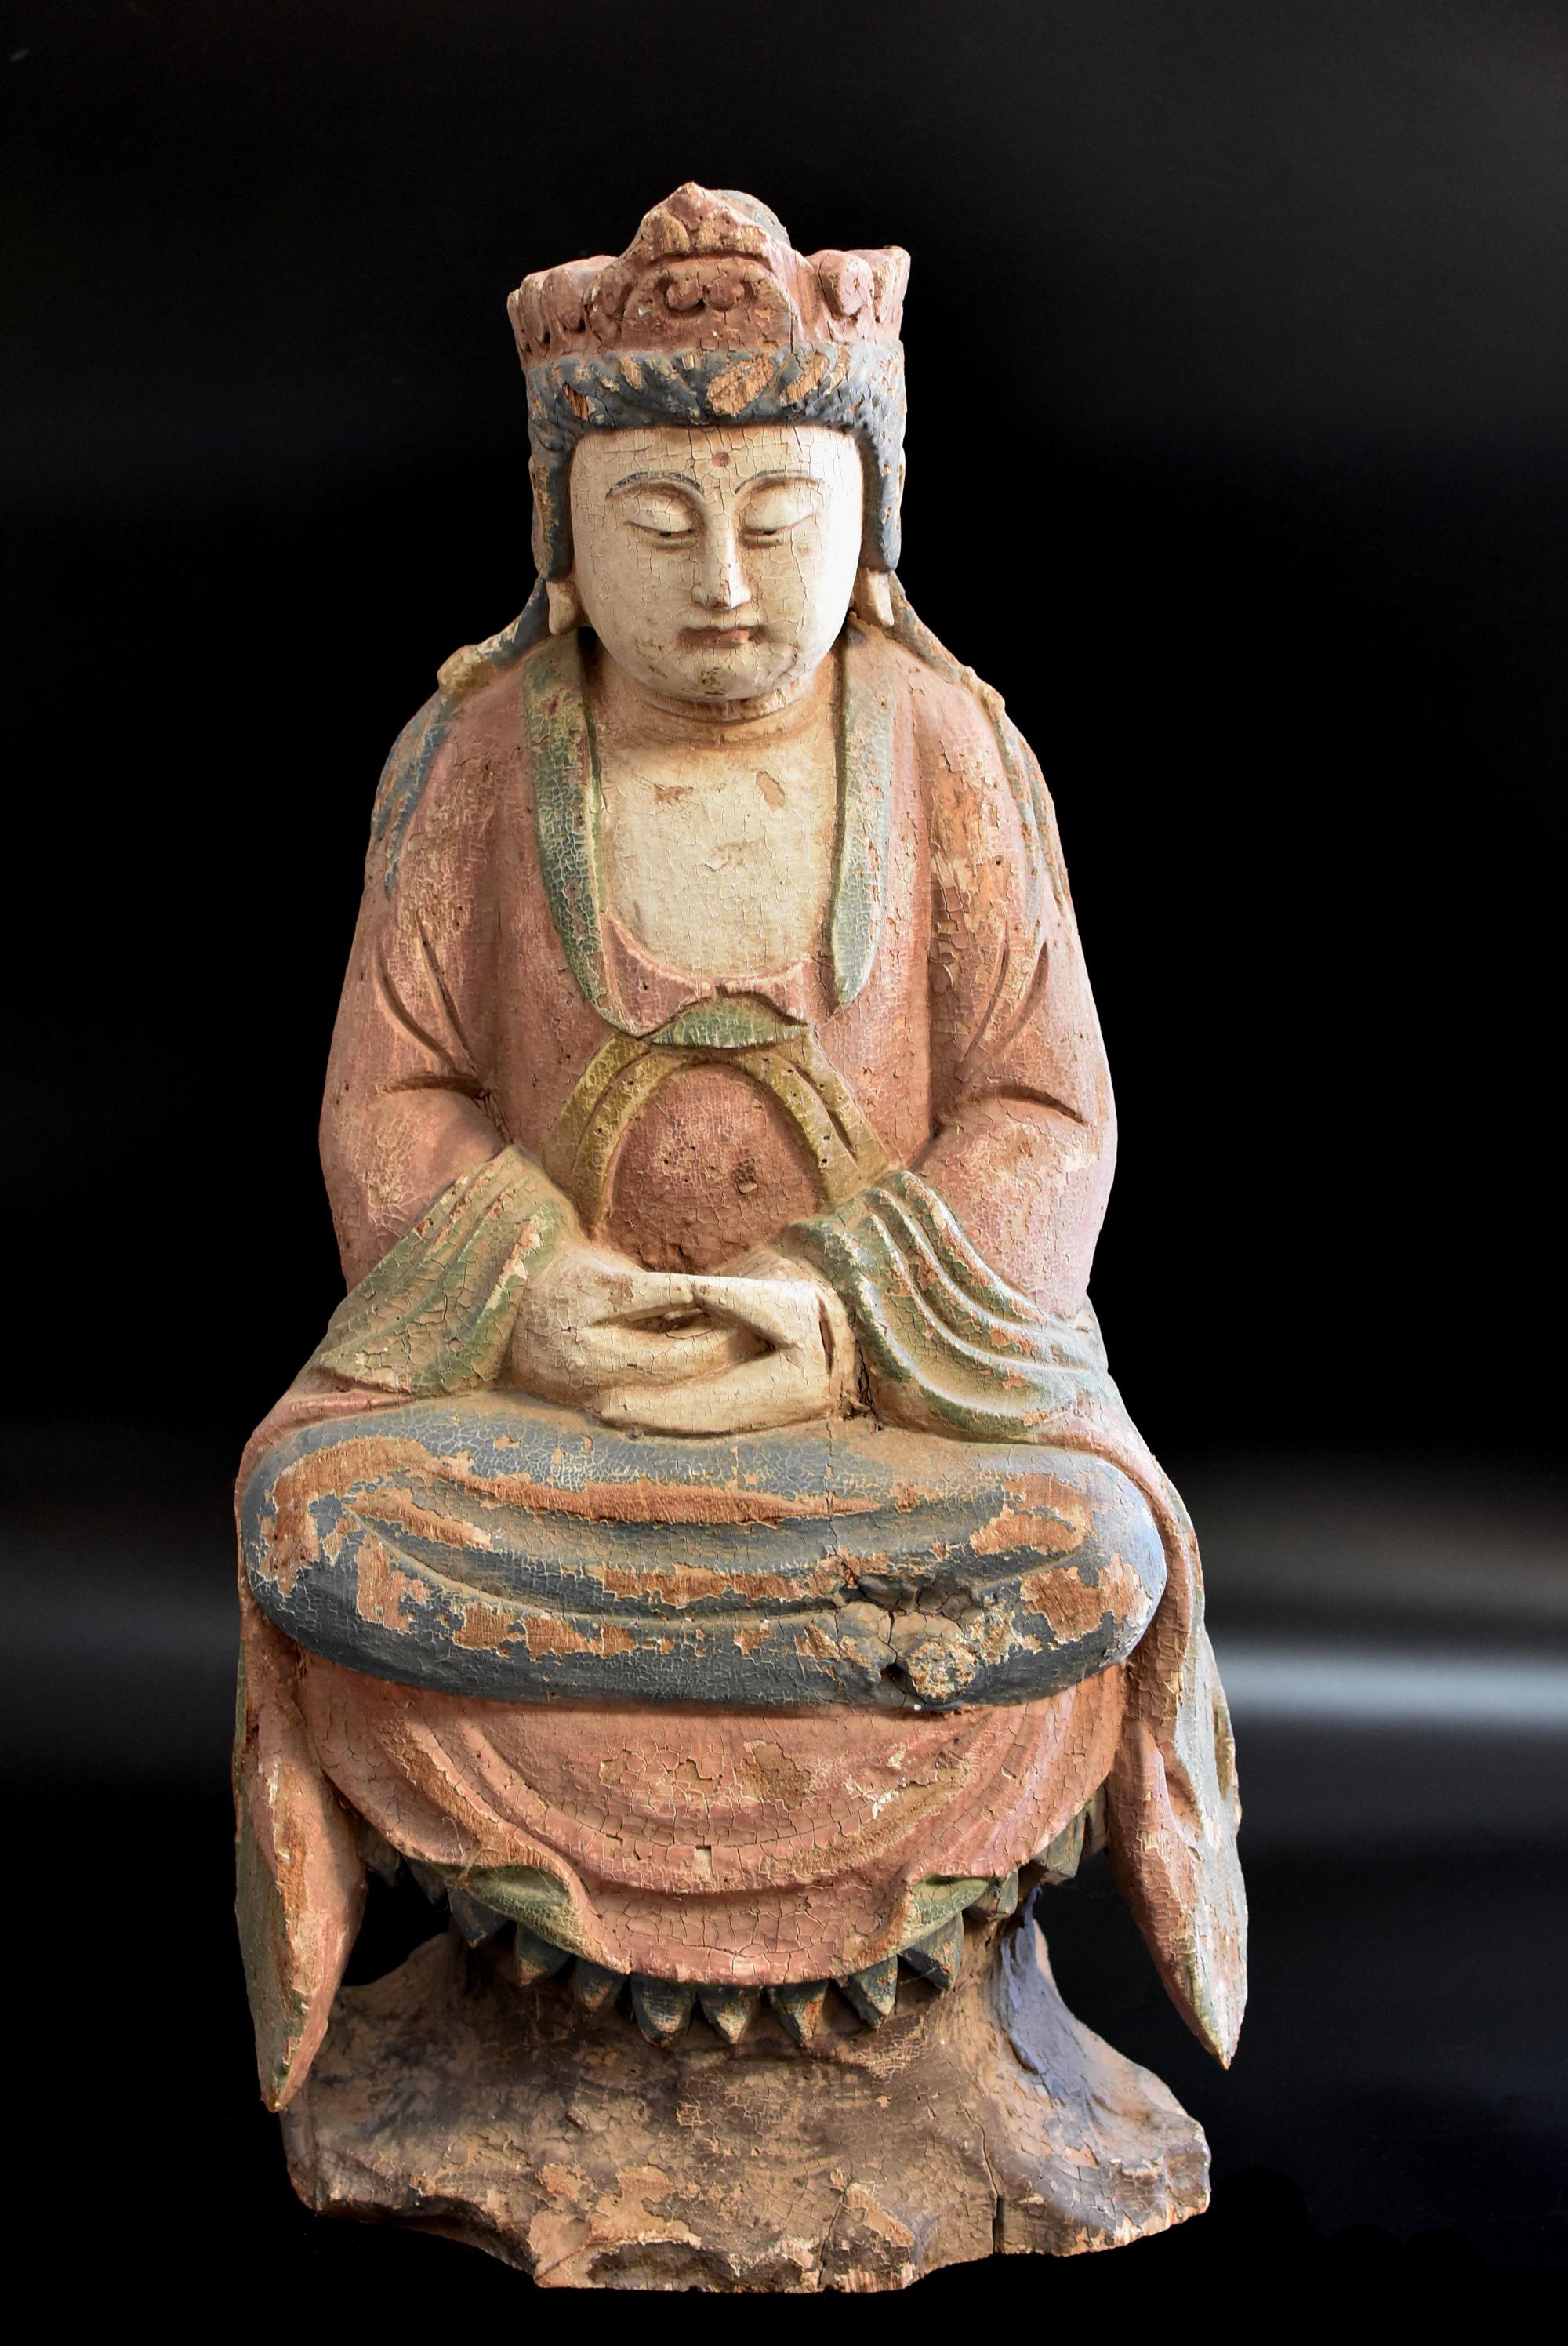 A large, early 20th century hand carved wooden statue of Kwan Yin in beautiful pastel color. Seated with her legs folded into a lotus pose on a high pedestal, Kwan Yin has a broad face with a serene expression, the almond-shaped downcast eyes